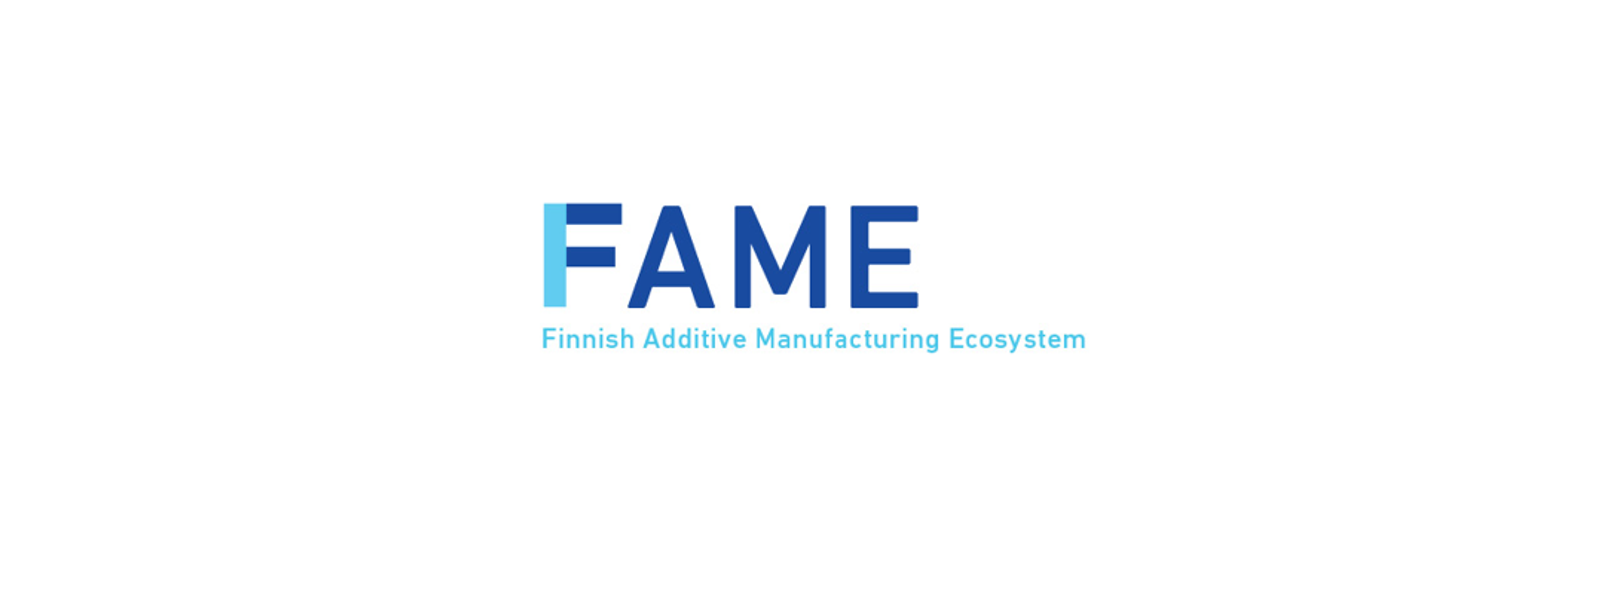 Image for SelectAM has joined the Finnish Additive Manufacturing Ecosystem (FAME)